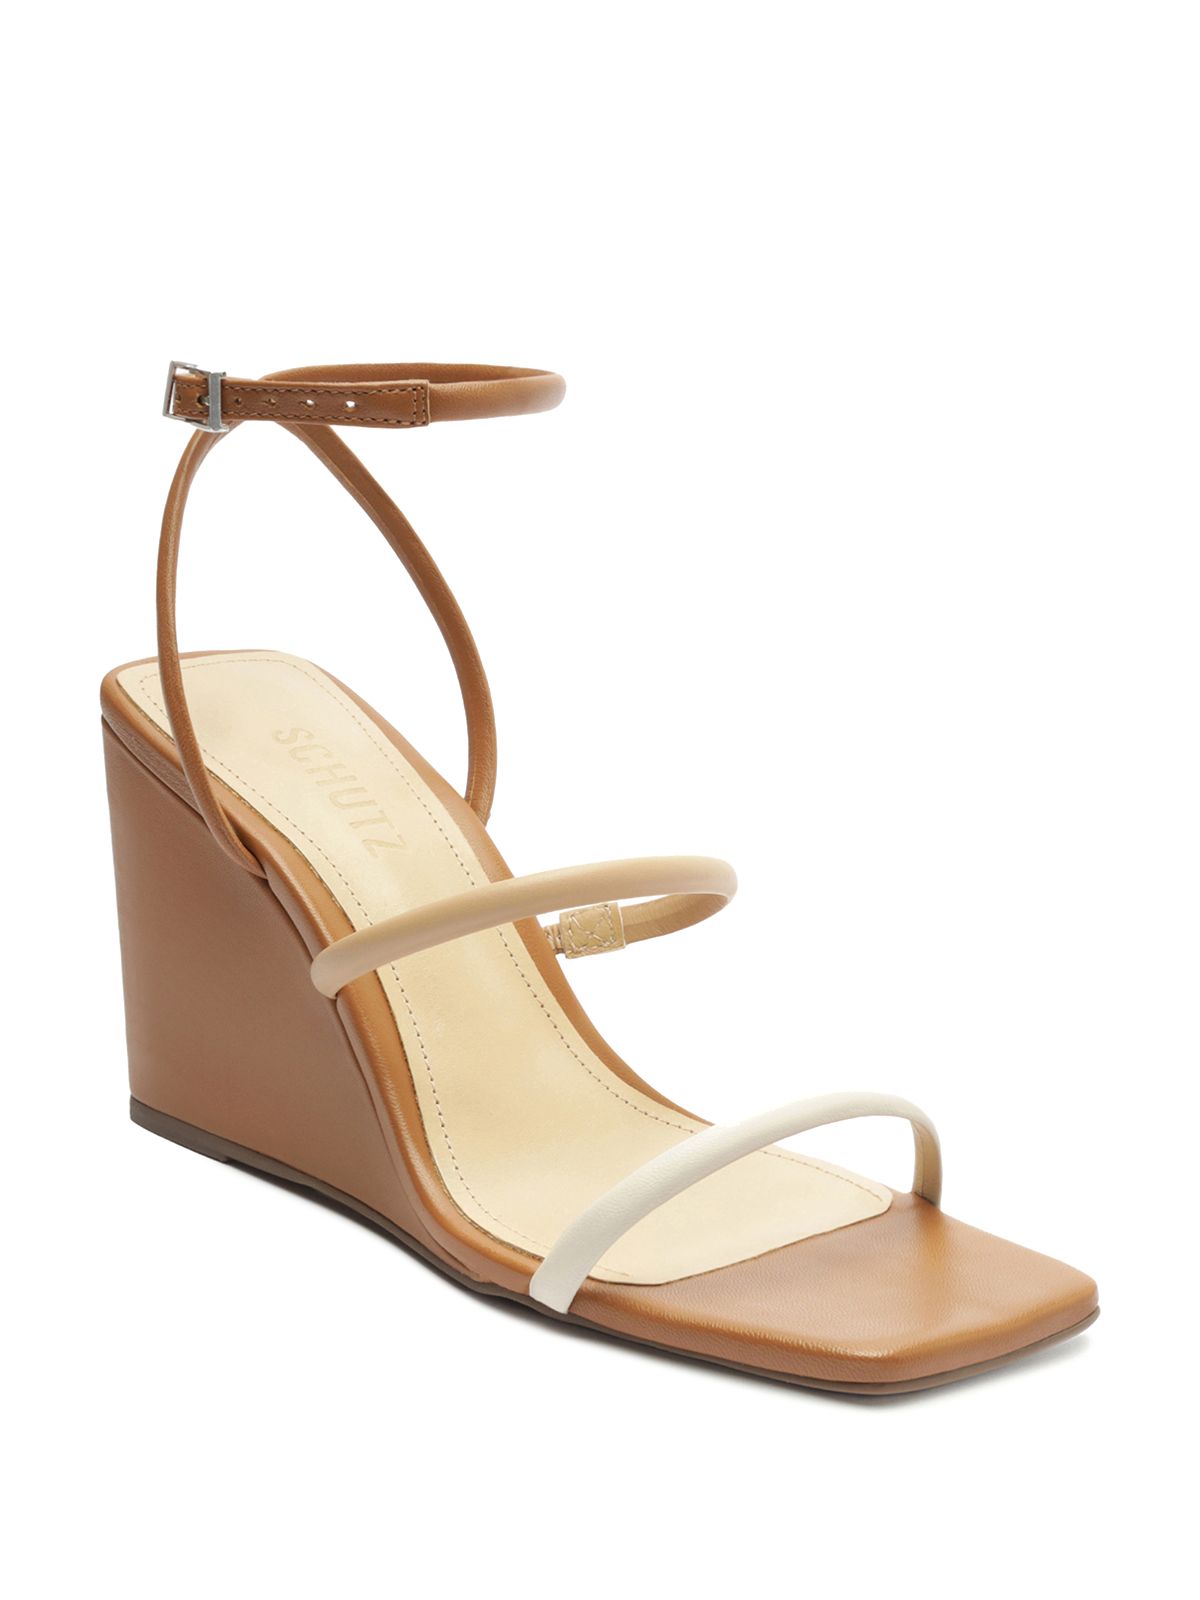 SCHUTZ Womens Beige Ankle Strap Strappy Nylla Square Toe Wedge Buckle Leather Heeled Sandal 8.5 B